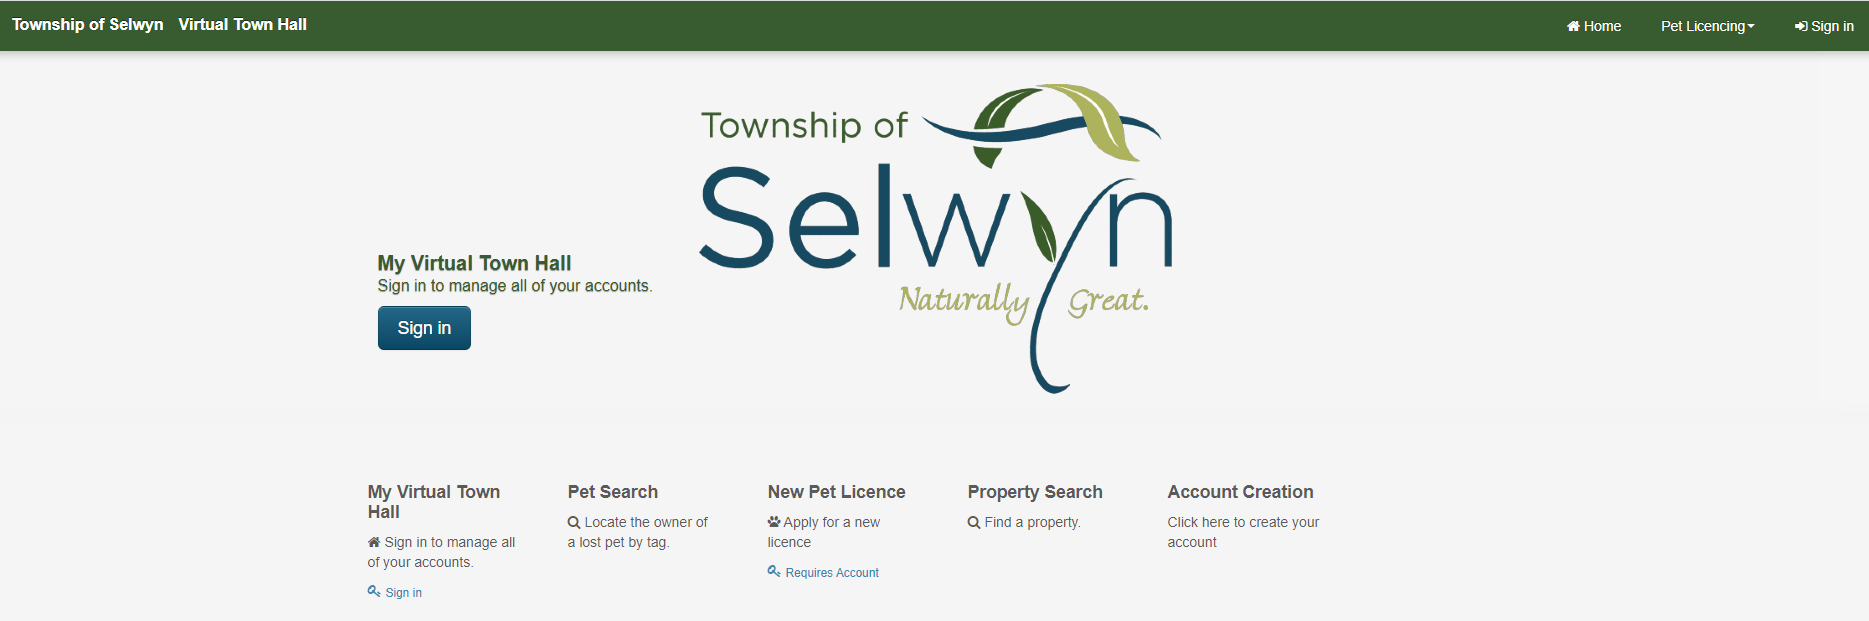 Image of the Virtual Town Hall home page